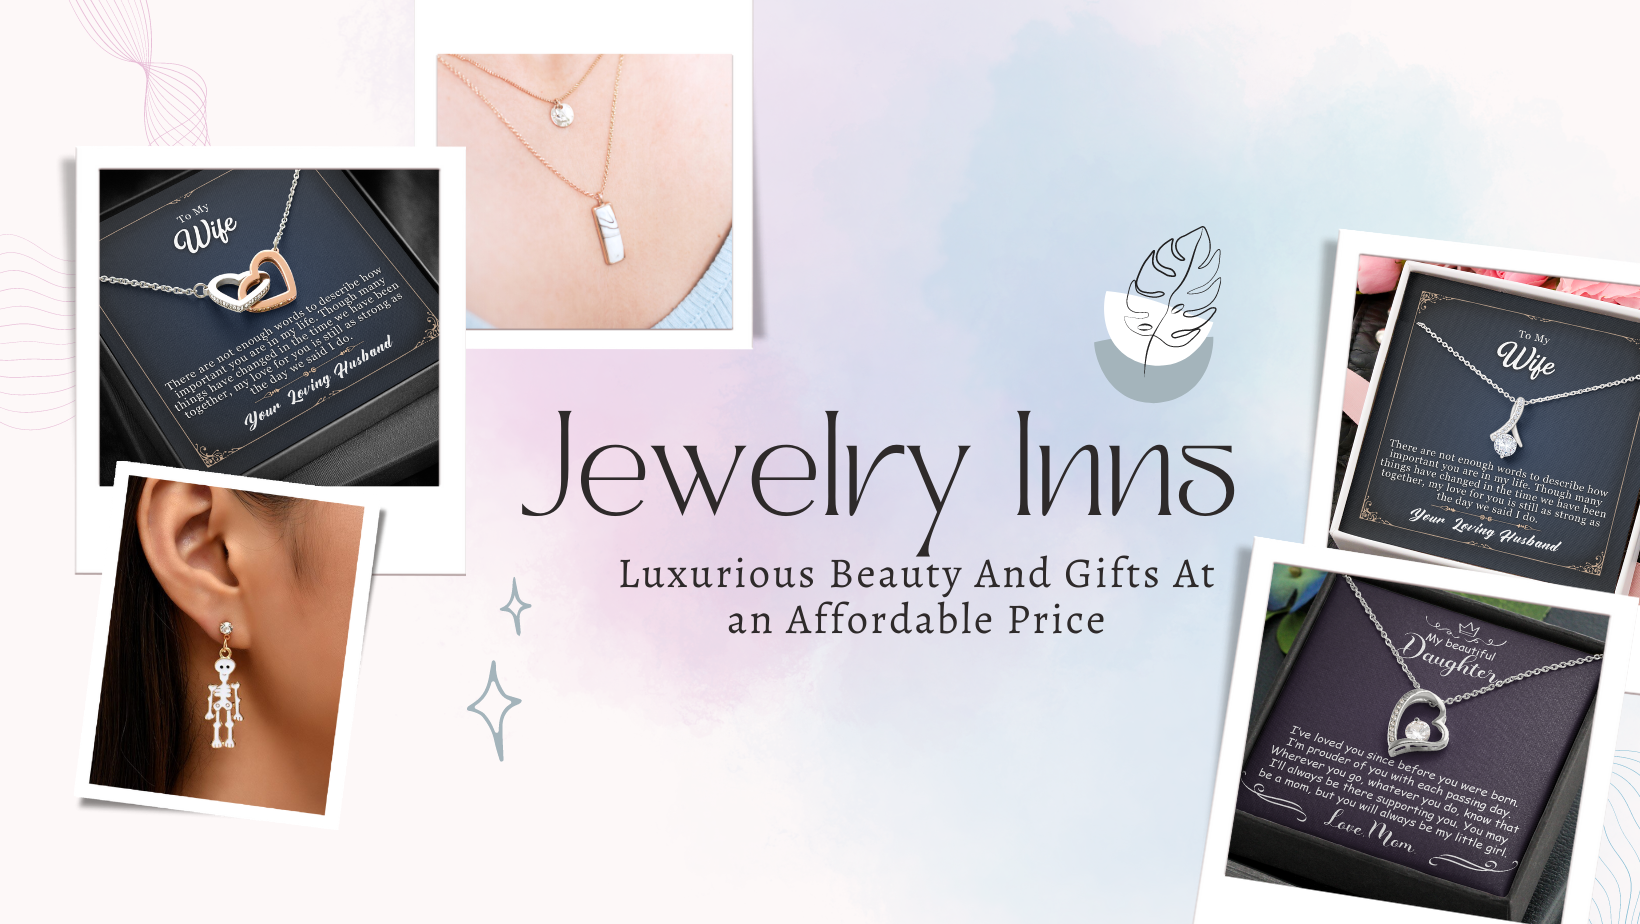 Jewelry Inns - Luxurious Beauty and Gifts at an Affordable prices